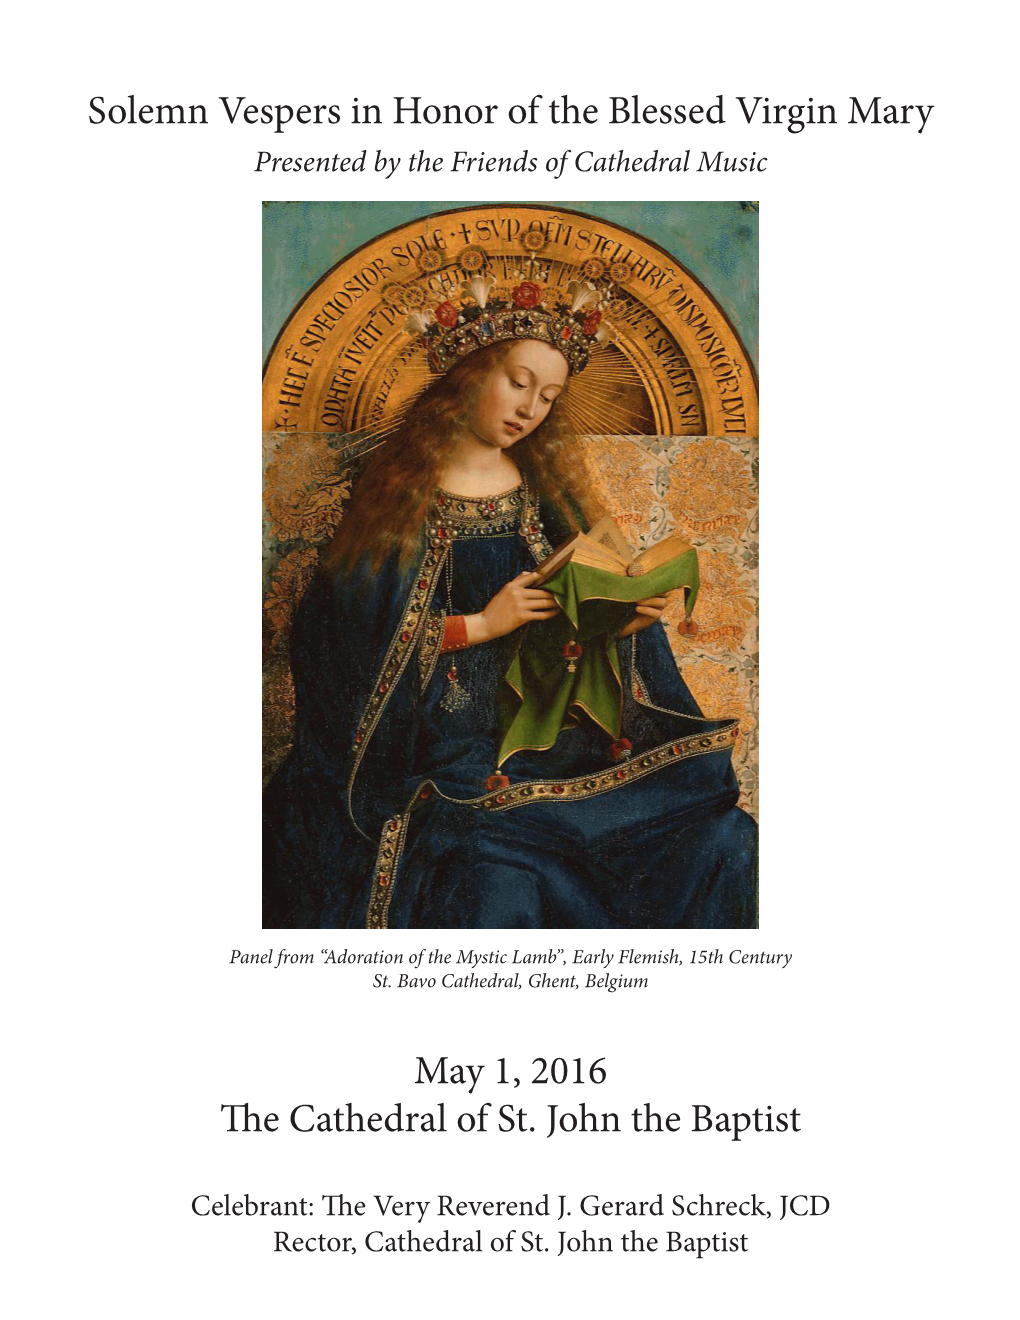 Solemn Vespers in Honor of the Blessed Virgin Mary May 1, 2016